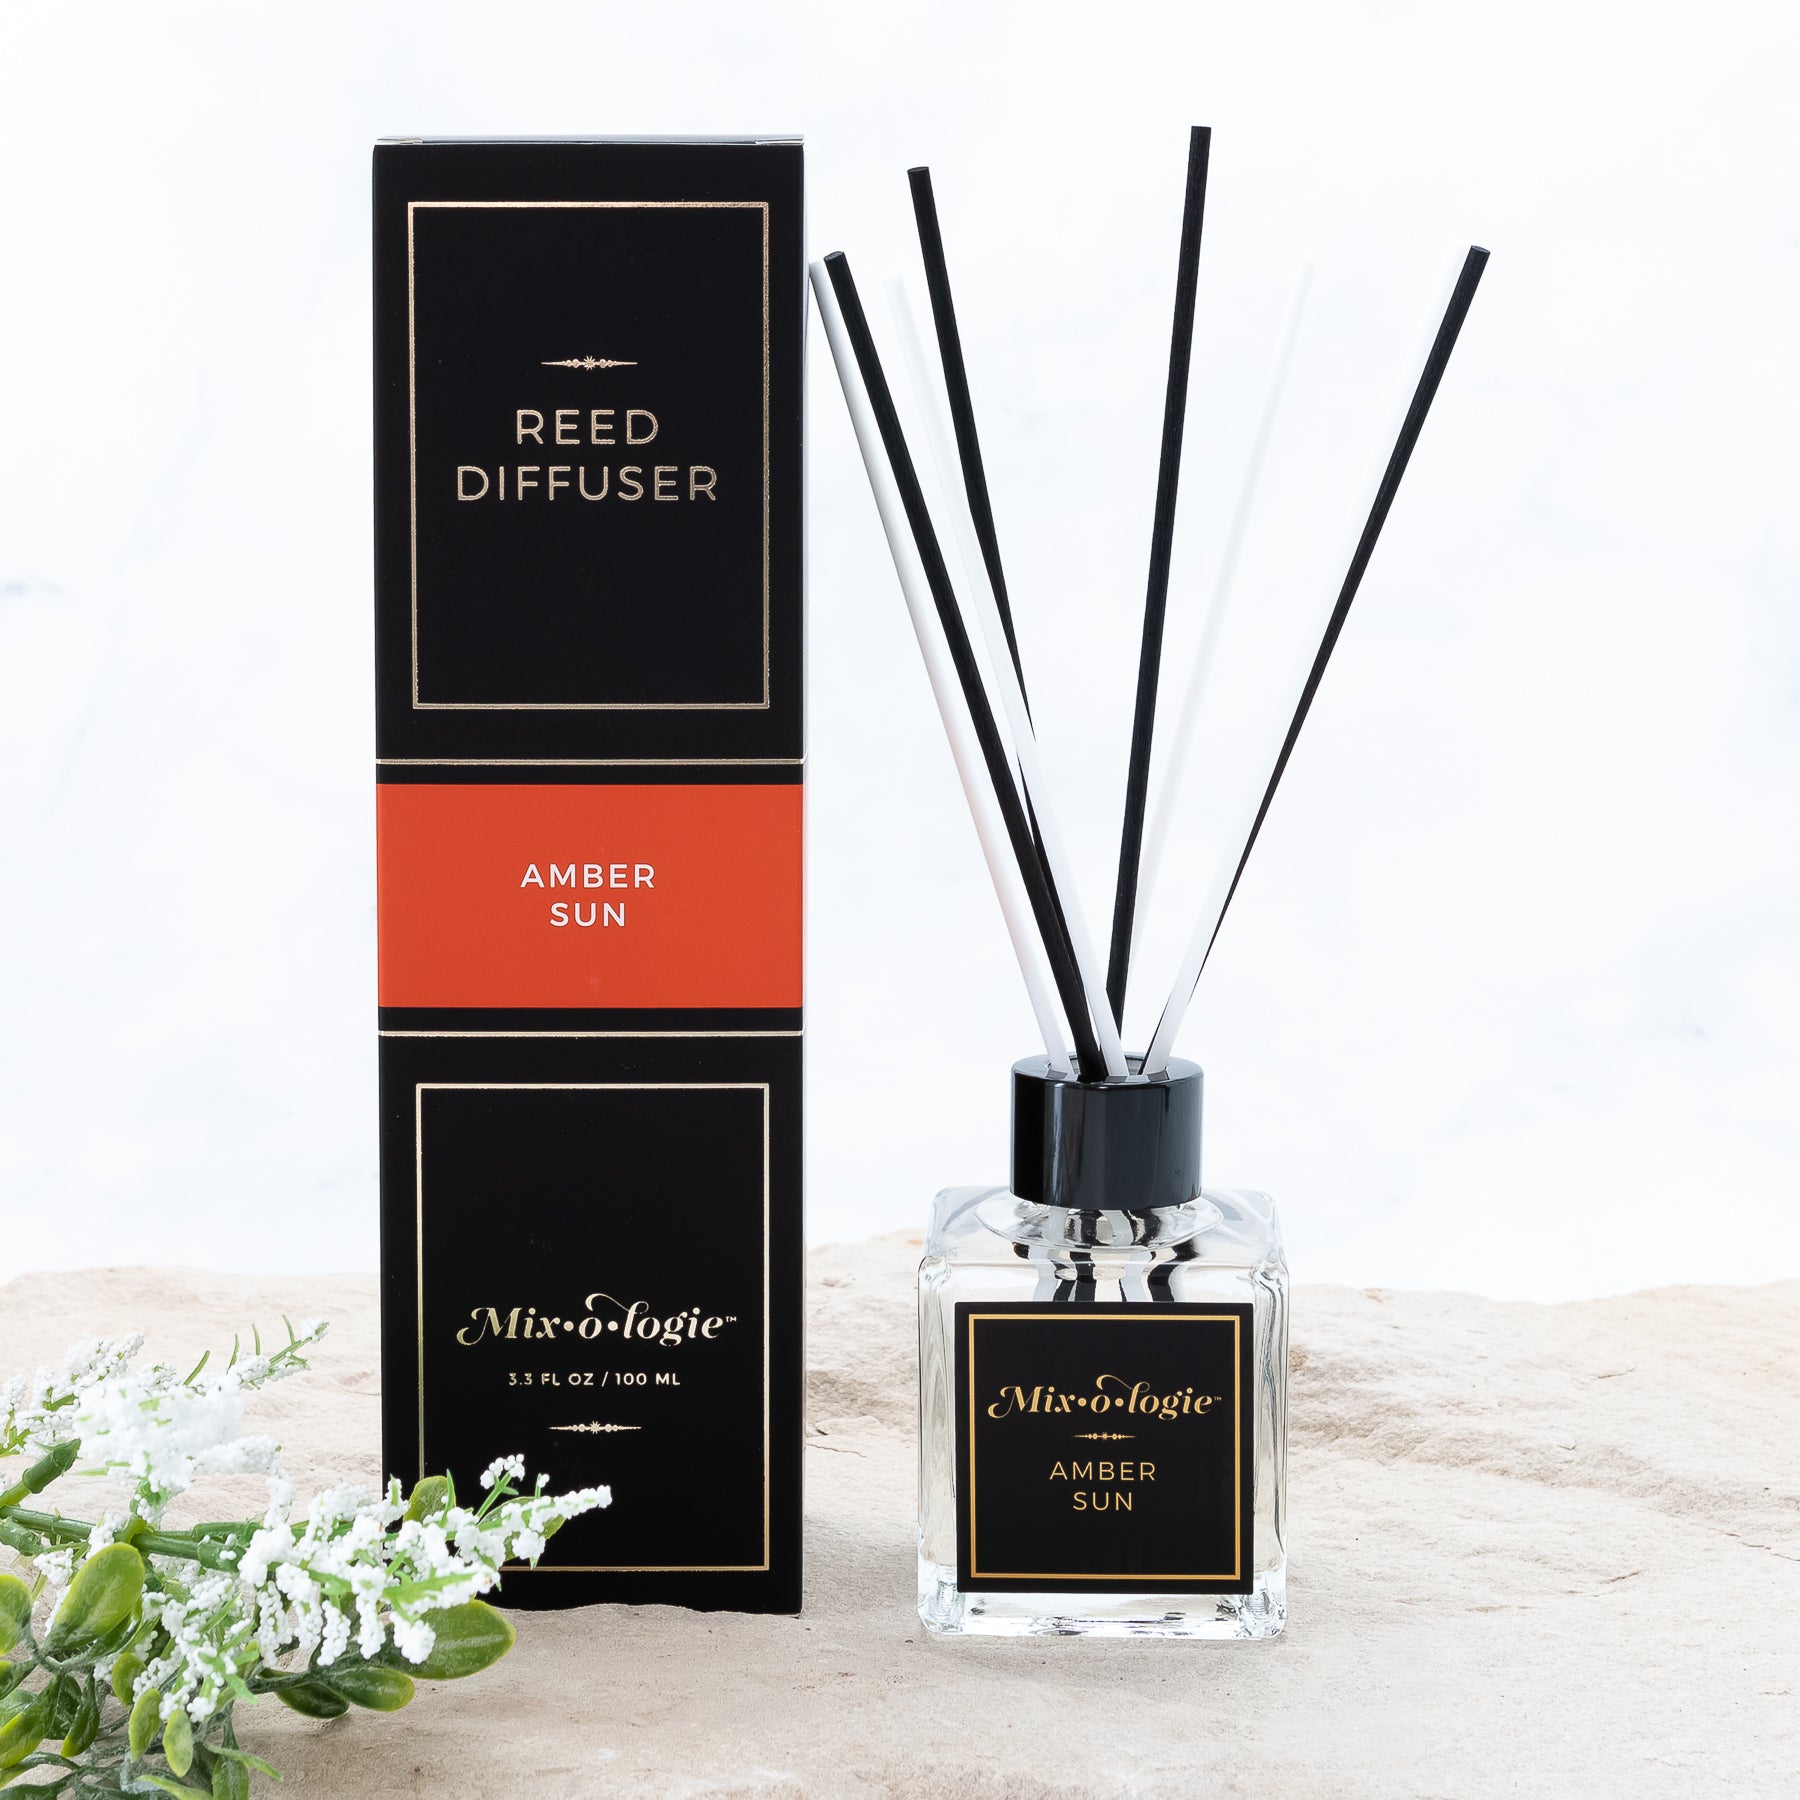 Amber Sun Reed Diffuser is a clear square glass container with black label that says Mixologie – Amber Sun. Has a black top and 4 white & 4 black reed sticks coming out of top, is 3.3 fl oz or 100 mL of clear scented liquid. Black rectangle package box with orange label. Box and diffuser are pictured with sand and greenery with white flowers.